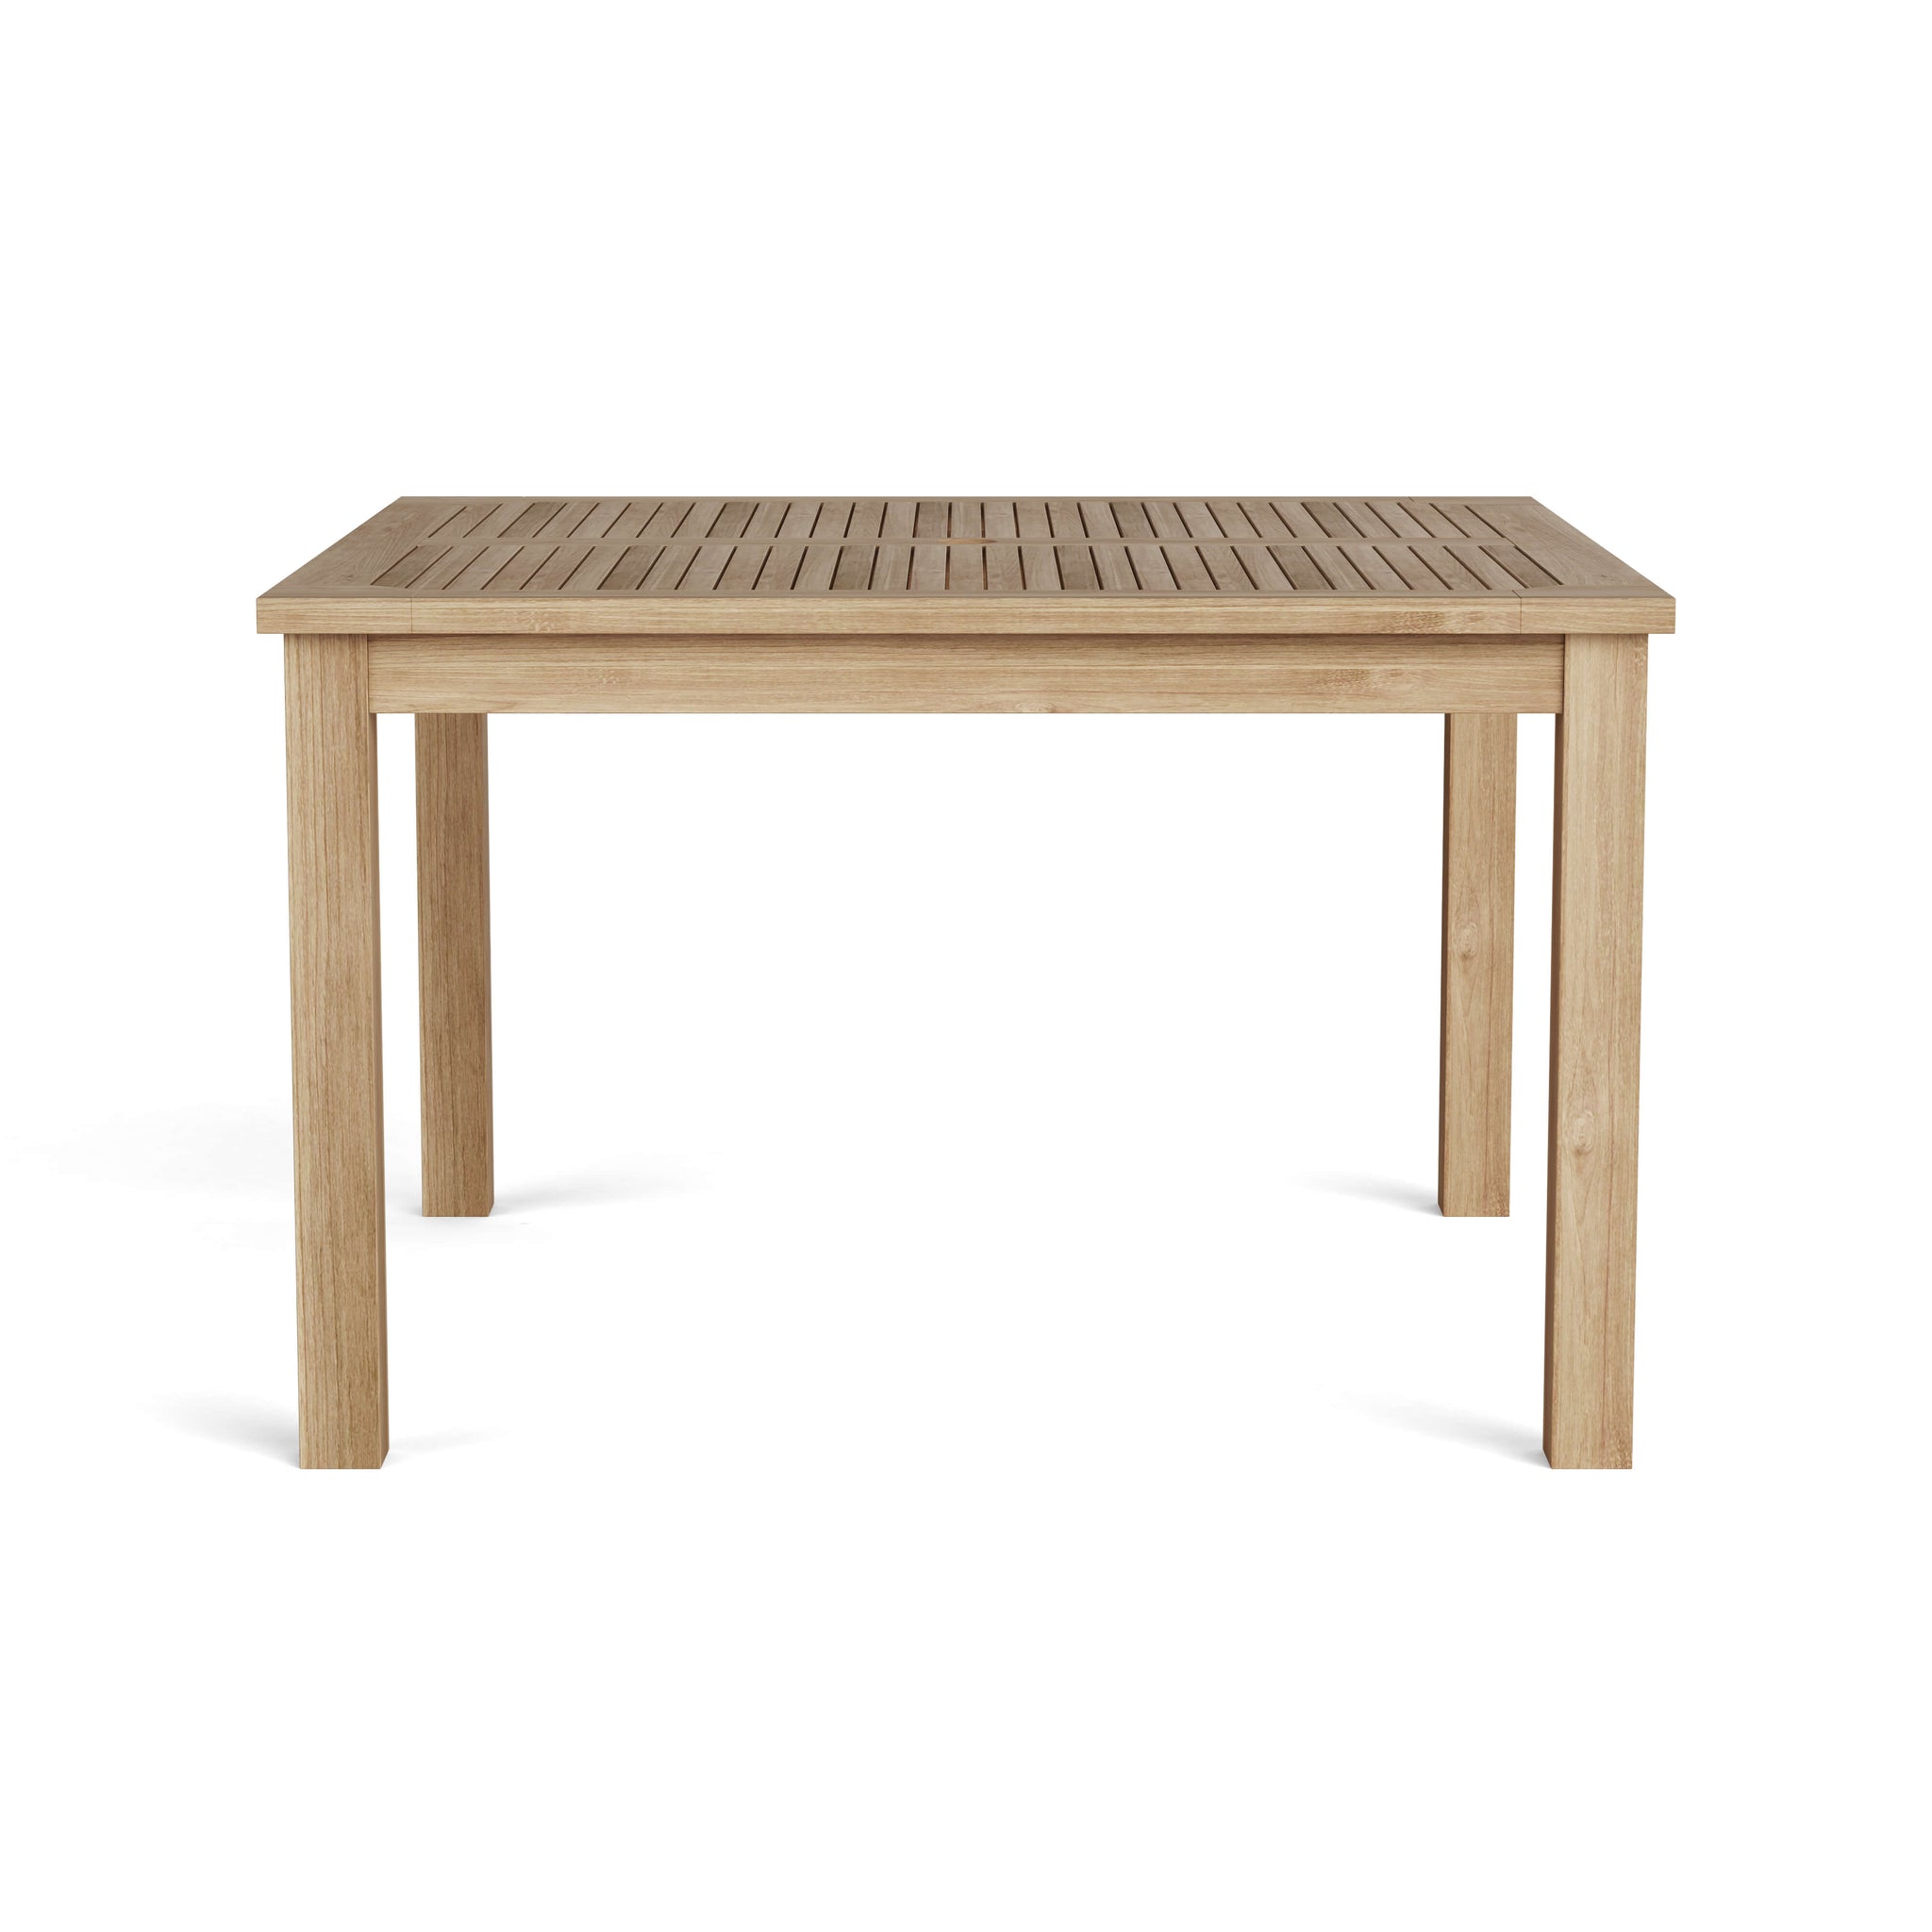 Anderson Teak 47" Windsor Square Small Slat Dining Table TB-047SS